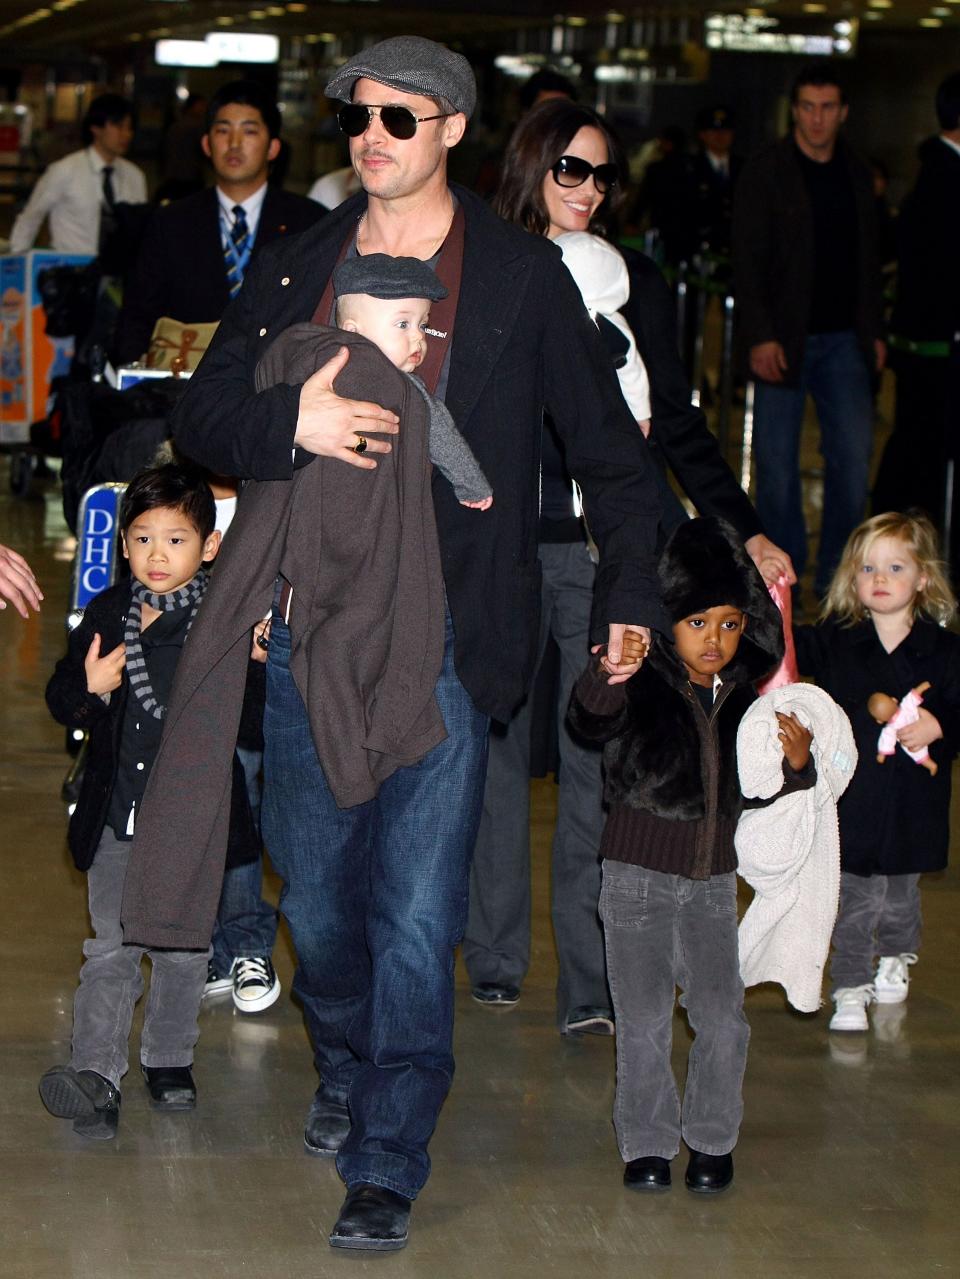 Brad Pitt and Angelina Jolie in Japan with their children, from left, Pax, Knox, Zahara and Shiloh in 2009.